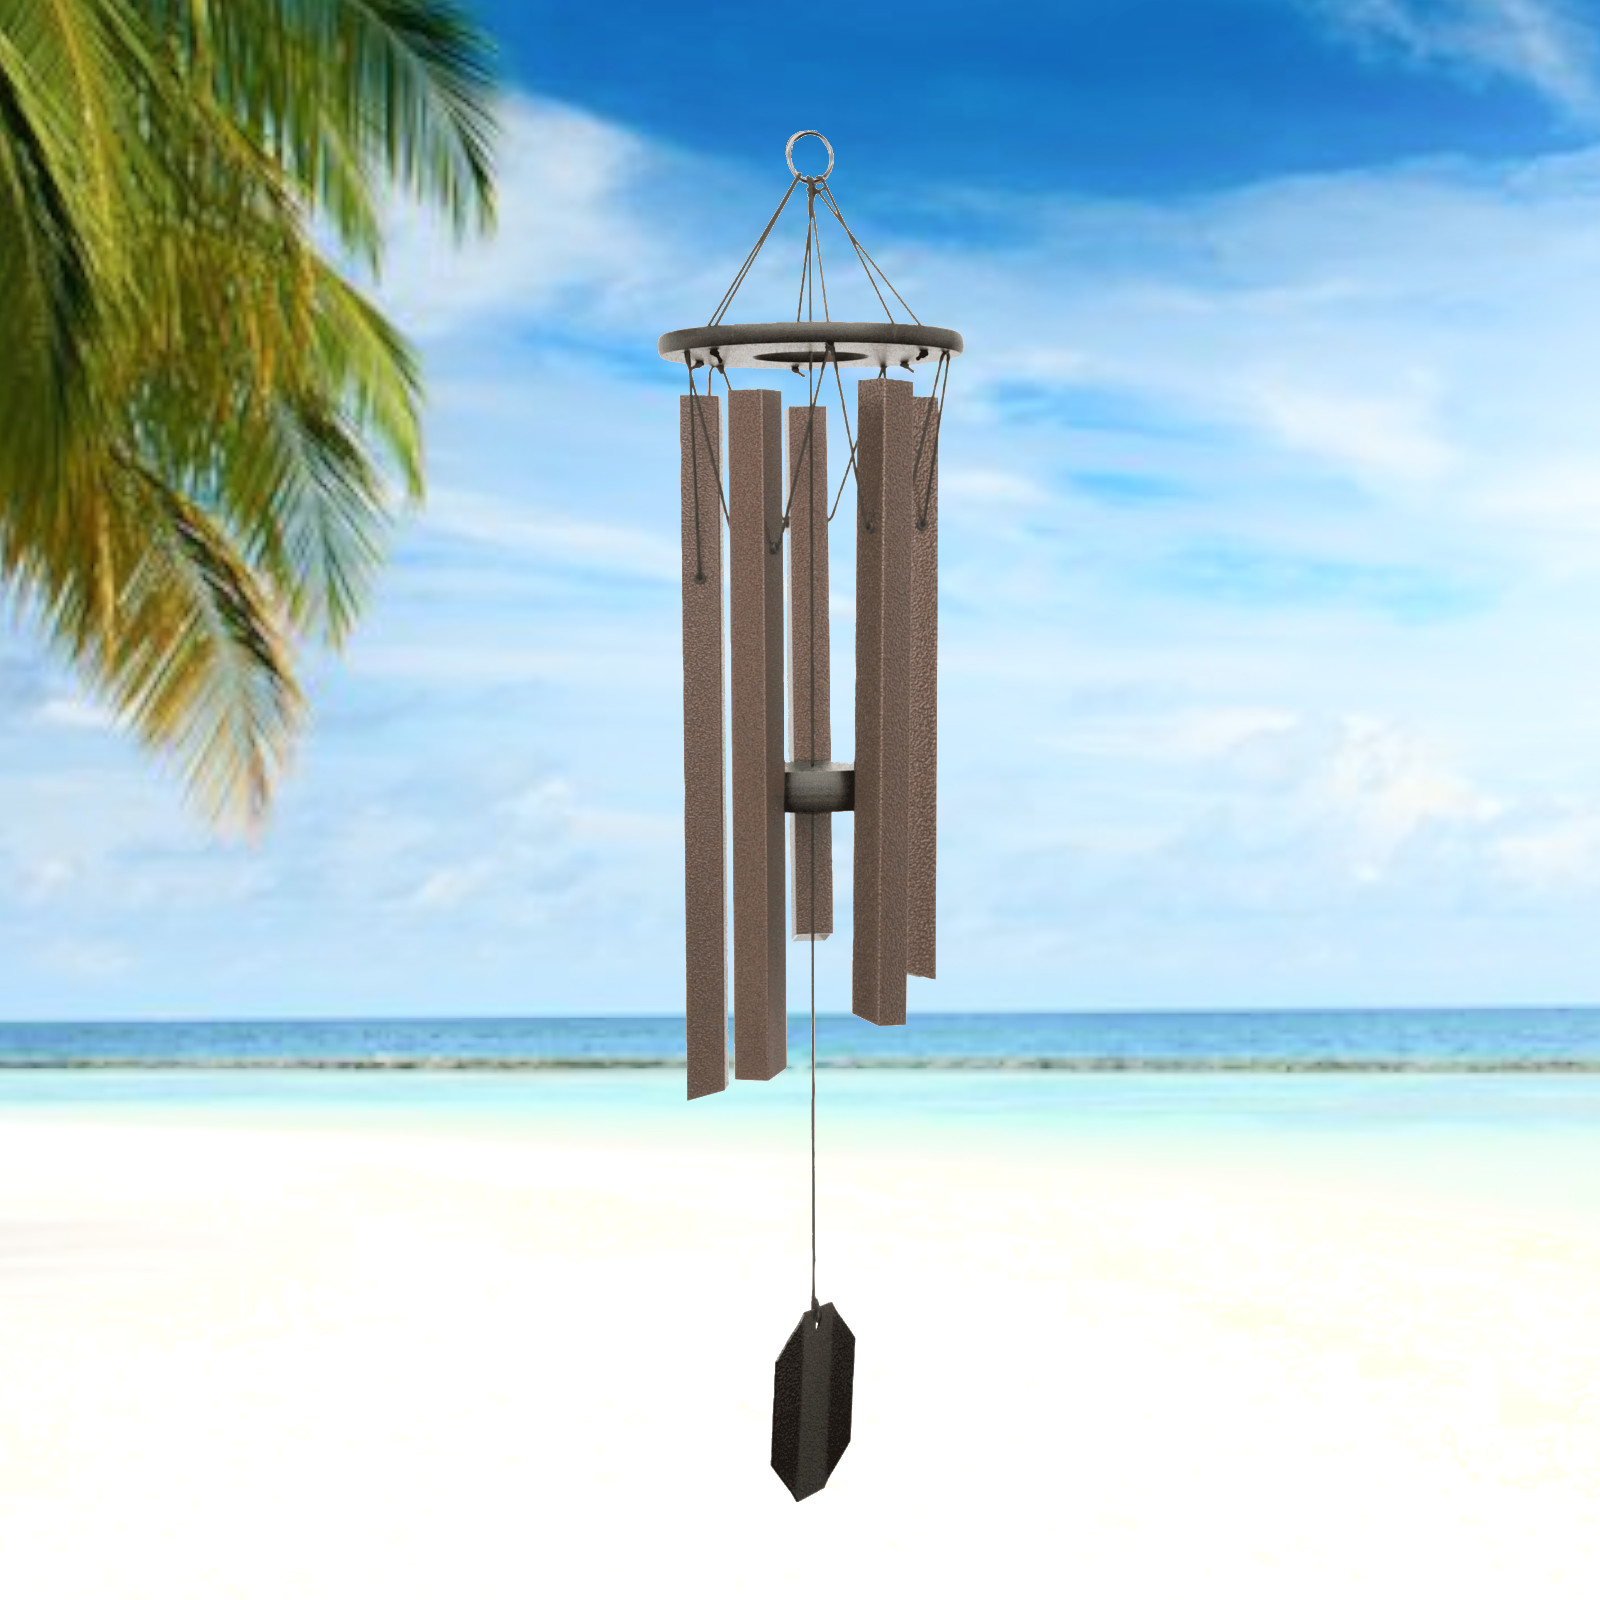 Lambright Country Chimes 36" Ocean Breeze Wind Chime